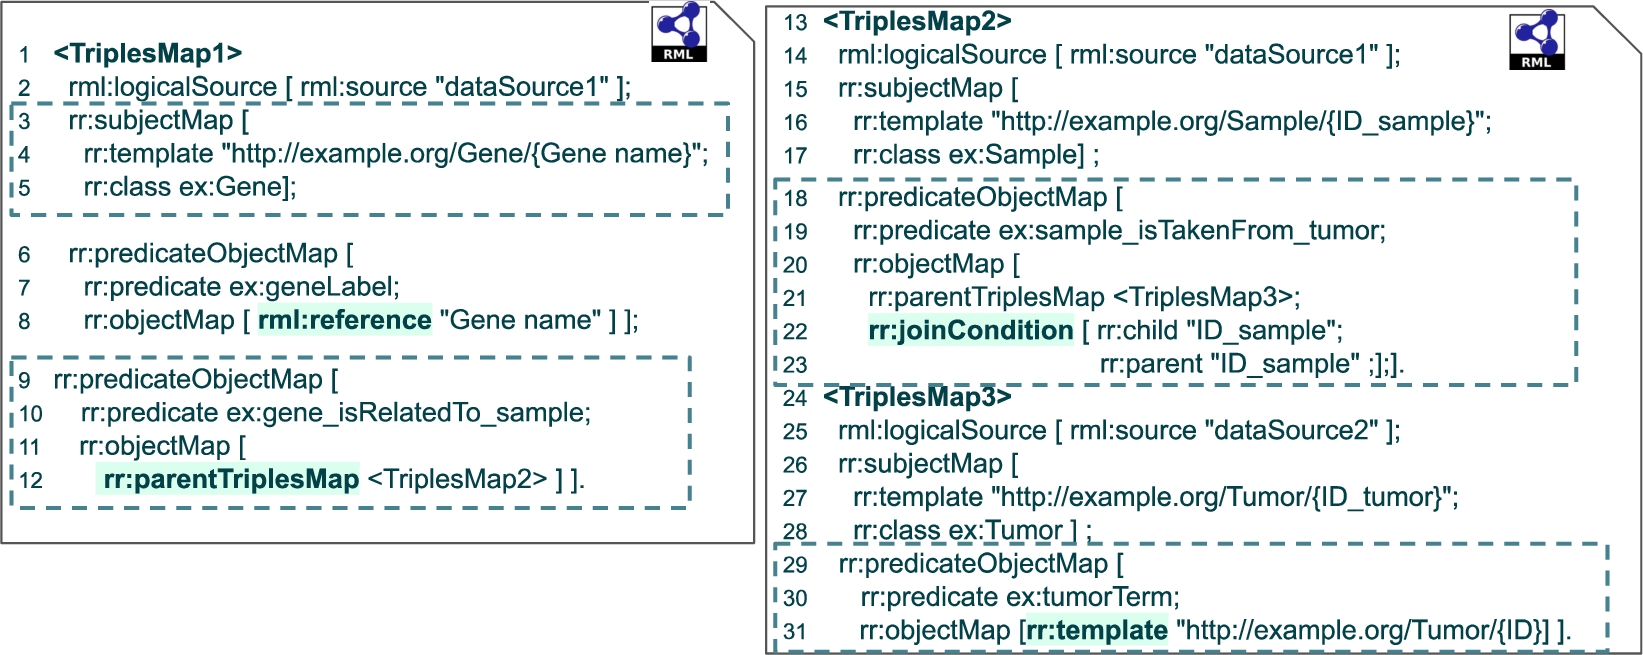 Example. Main concepts of the RDF mapping language (RML). Triples maps <TriplesMap1>, <TriplesMap2>, <TriplesMap3> correspond to RML mapping rules that define entities in the classes ex:Gene, ex:Sample, and ex:Tumor, respectively.